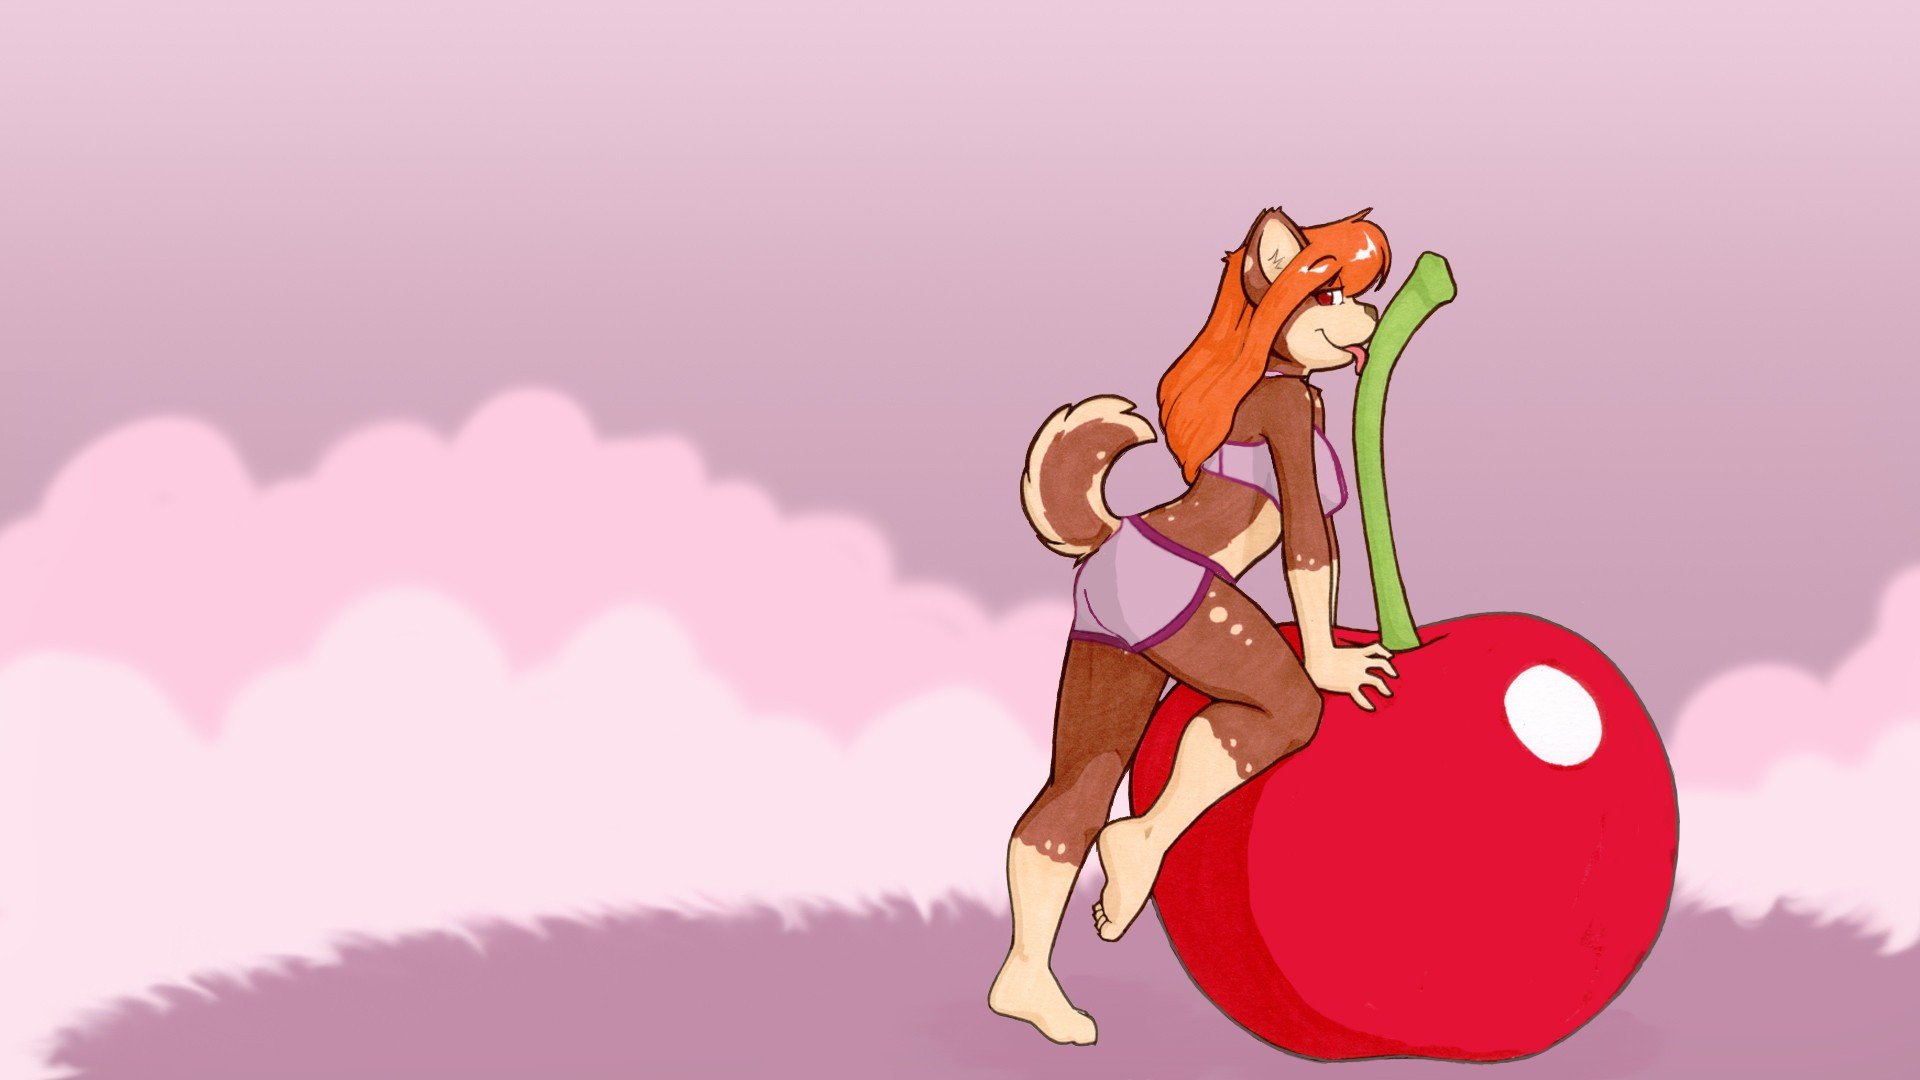 Wallpapers cherry furry suggestive on the desktop